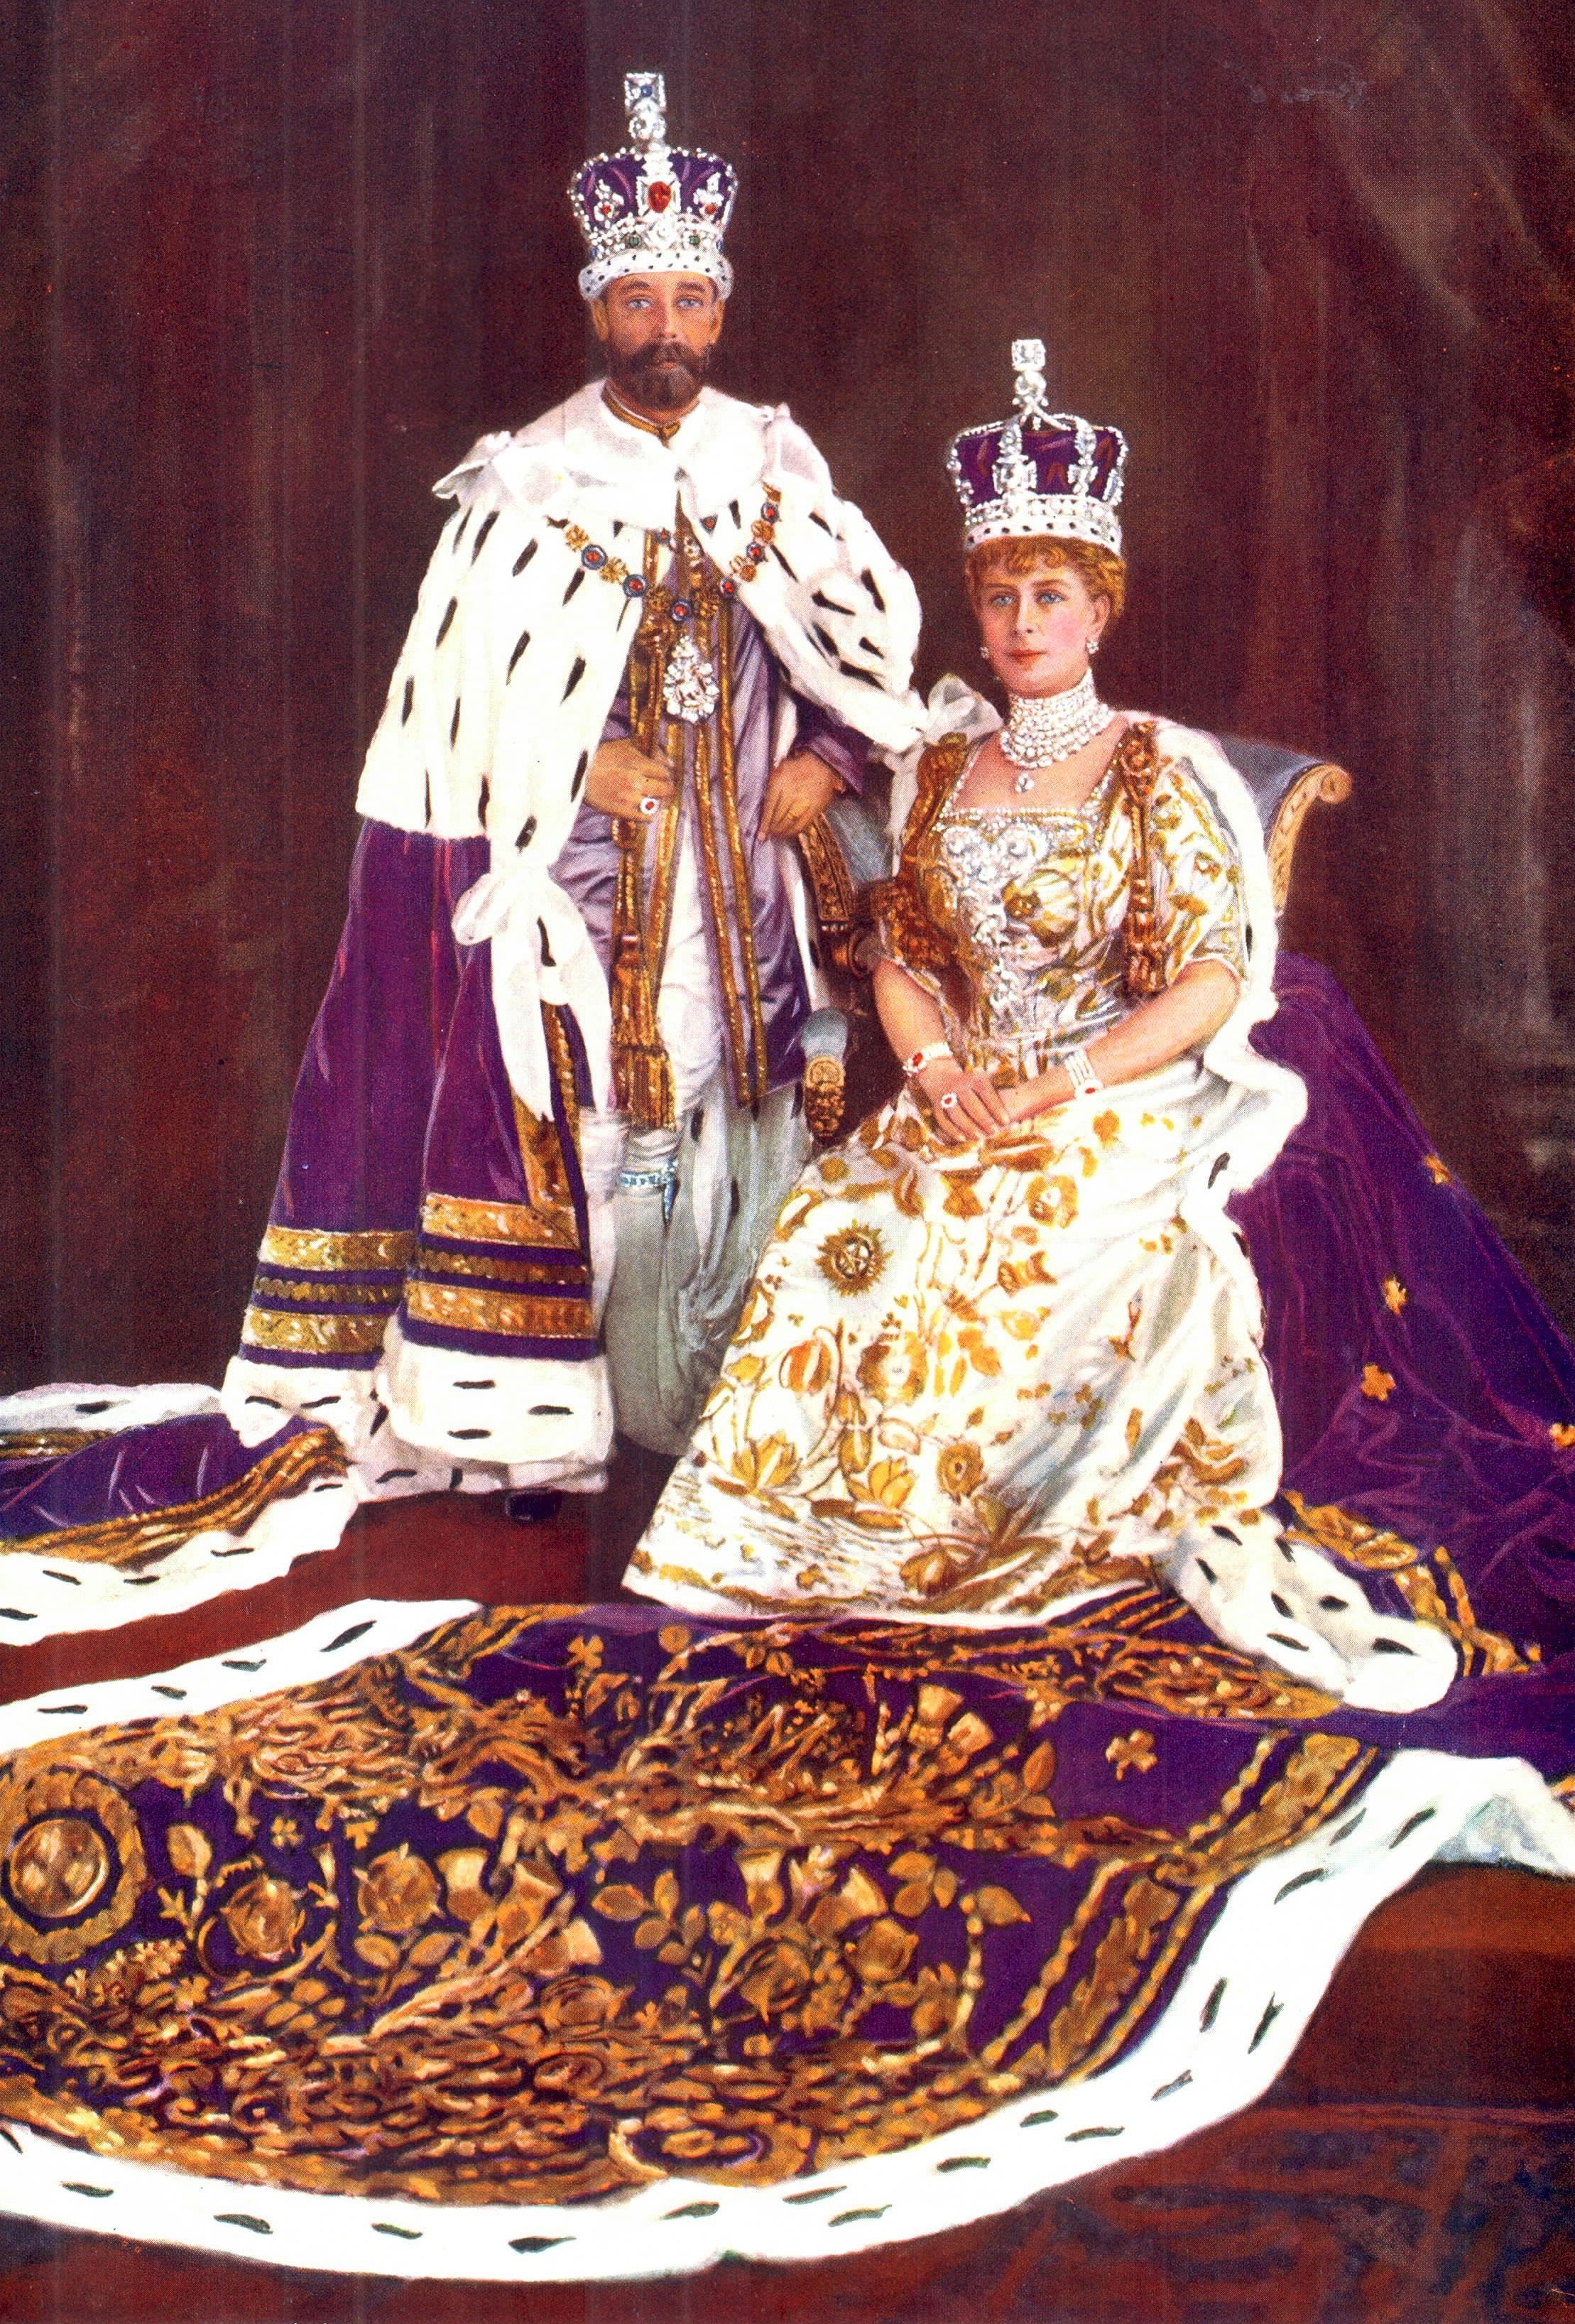 Queen Mary - with George V - in her coronation robes wearing the Queen Consort's Ring in 1911 